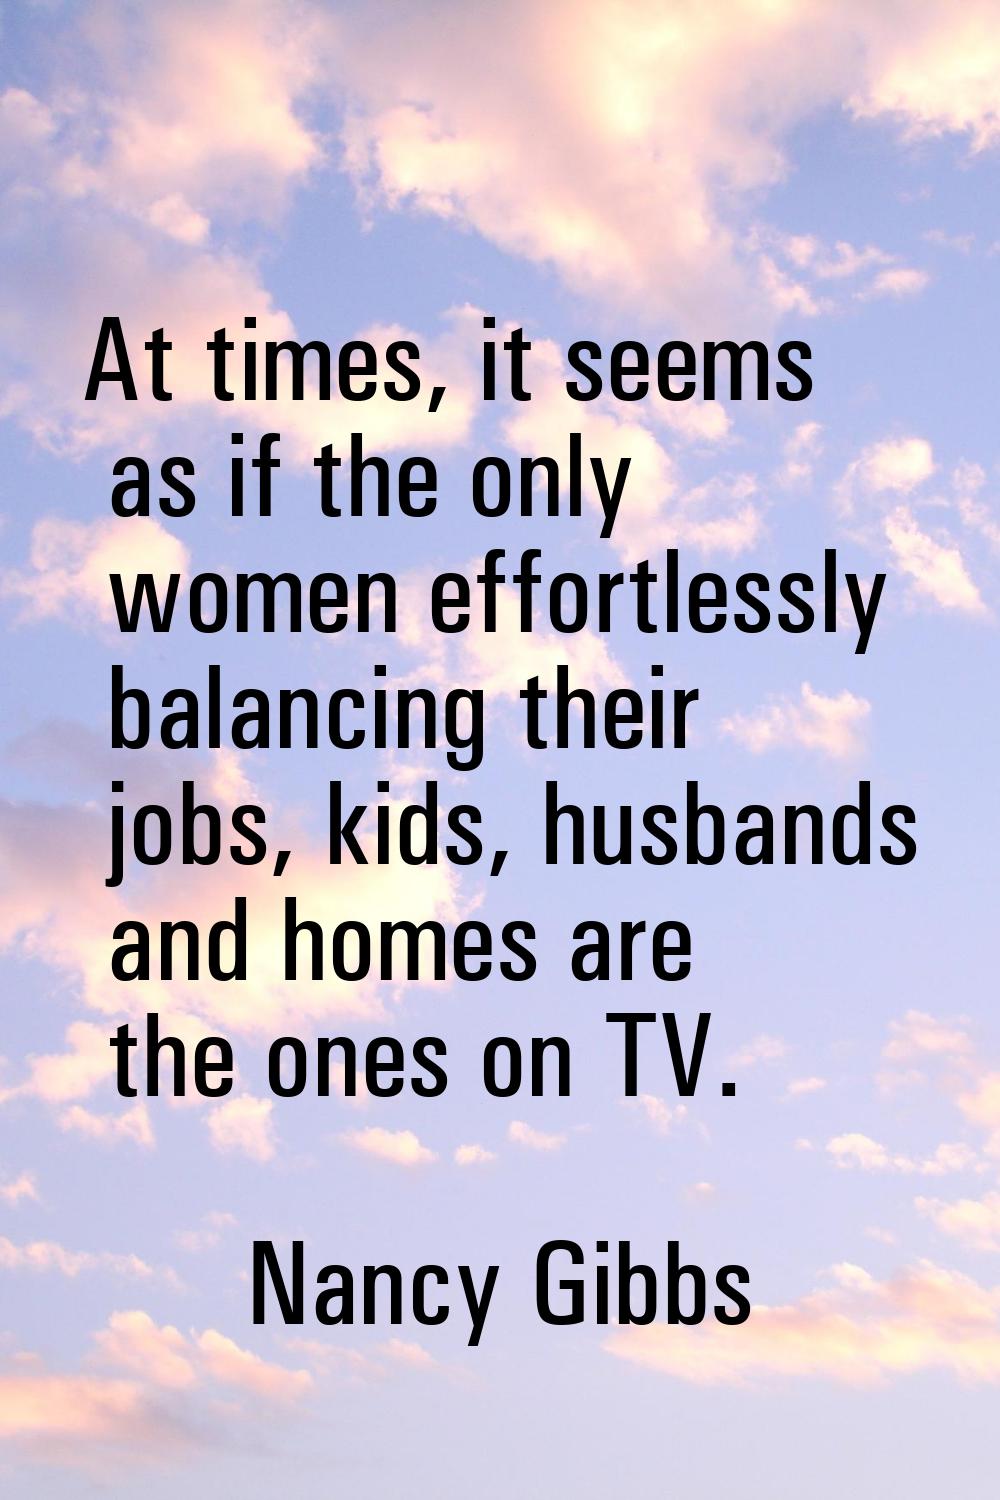 At times, it seems as if the only women effortlessly balancing their jobs, kids, husbands and homes